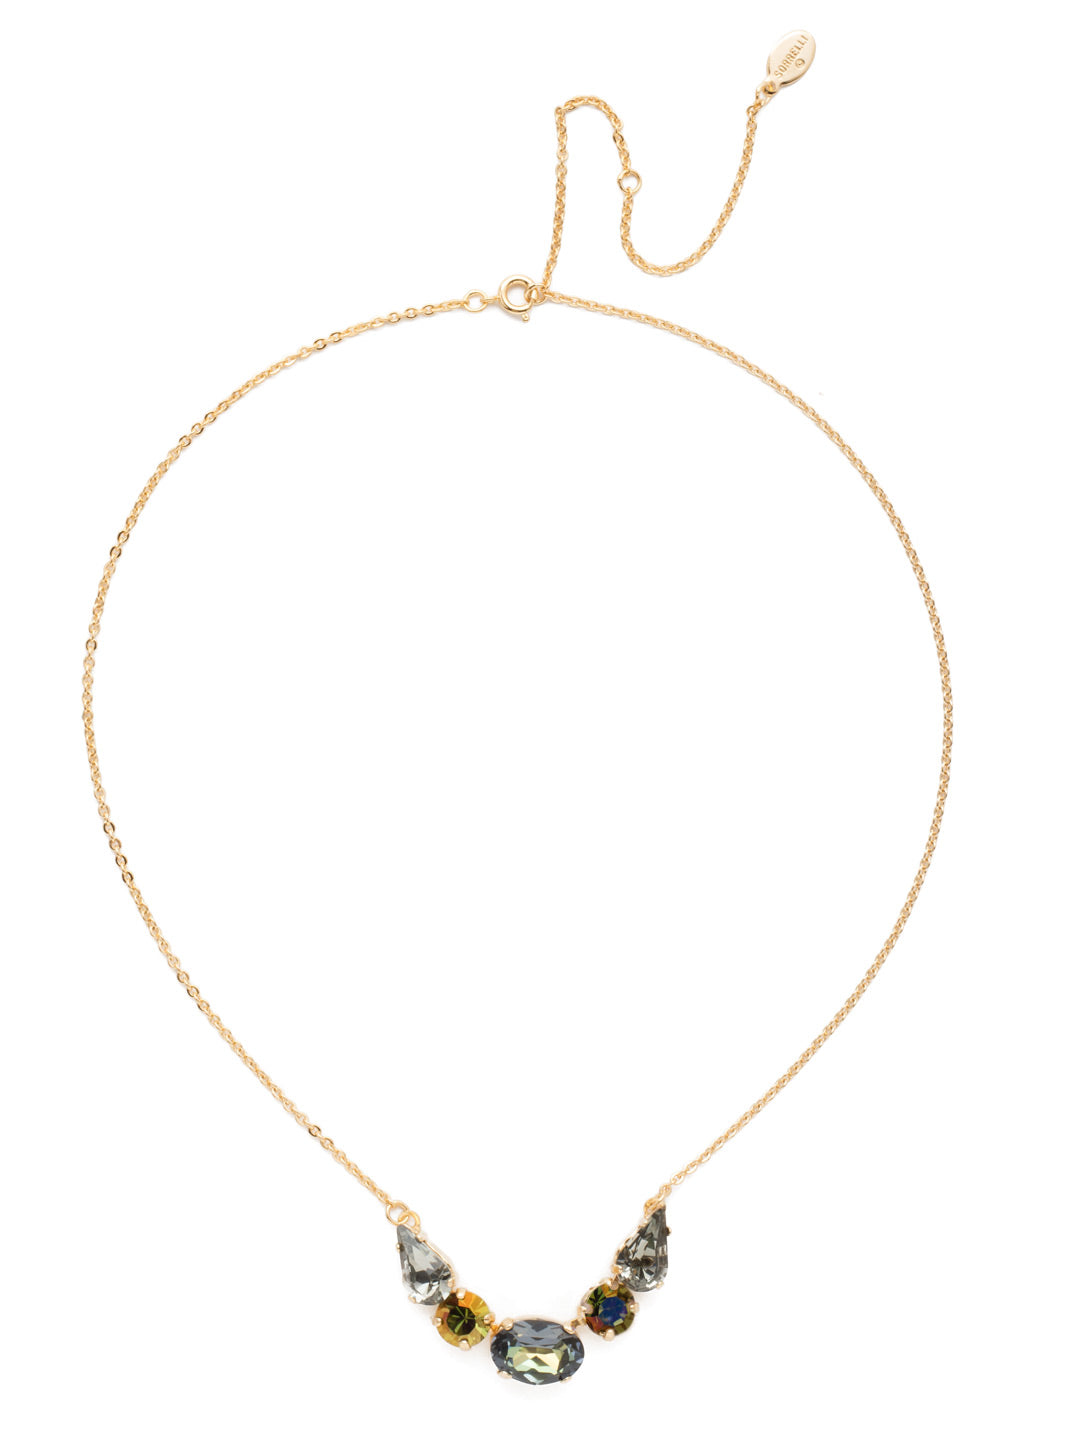 Kenya Tennis Necklace - NET7BGCSM - Looking for a touch of sparkle that's unique, too? Put on our Kenya Tennis Necklace featuring pear, round and oval shining crystals. From Sorrelli's Cashmere collection in our Bright Gold-tone finish.